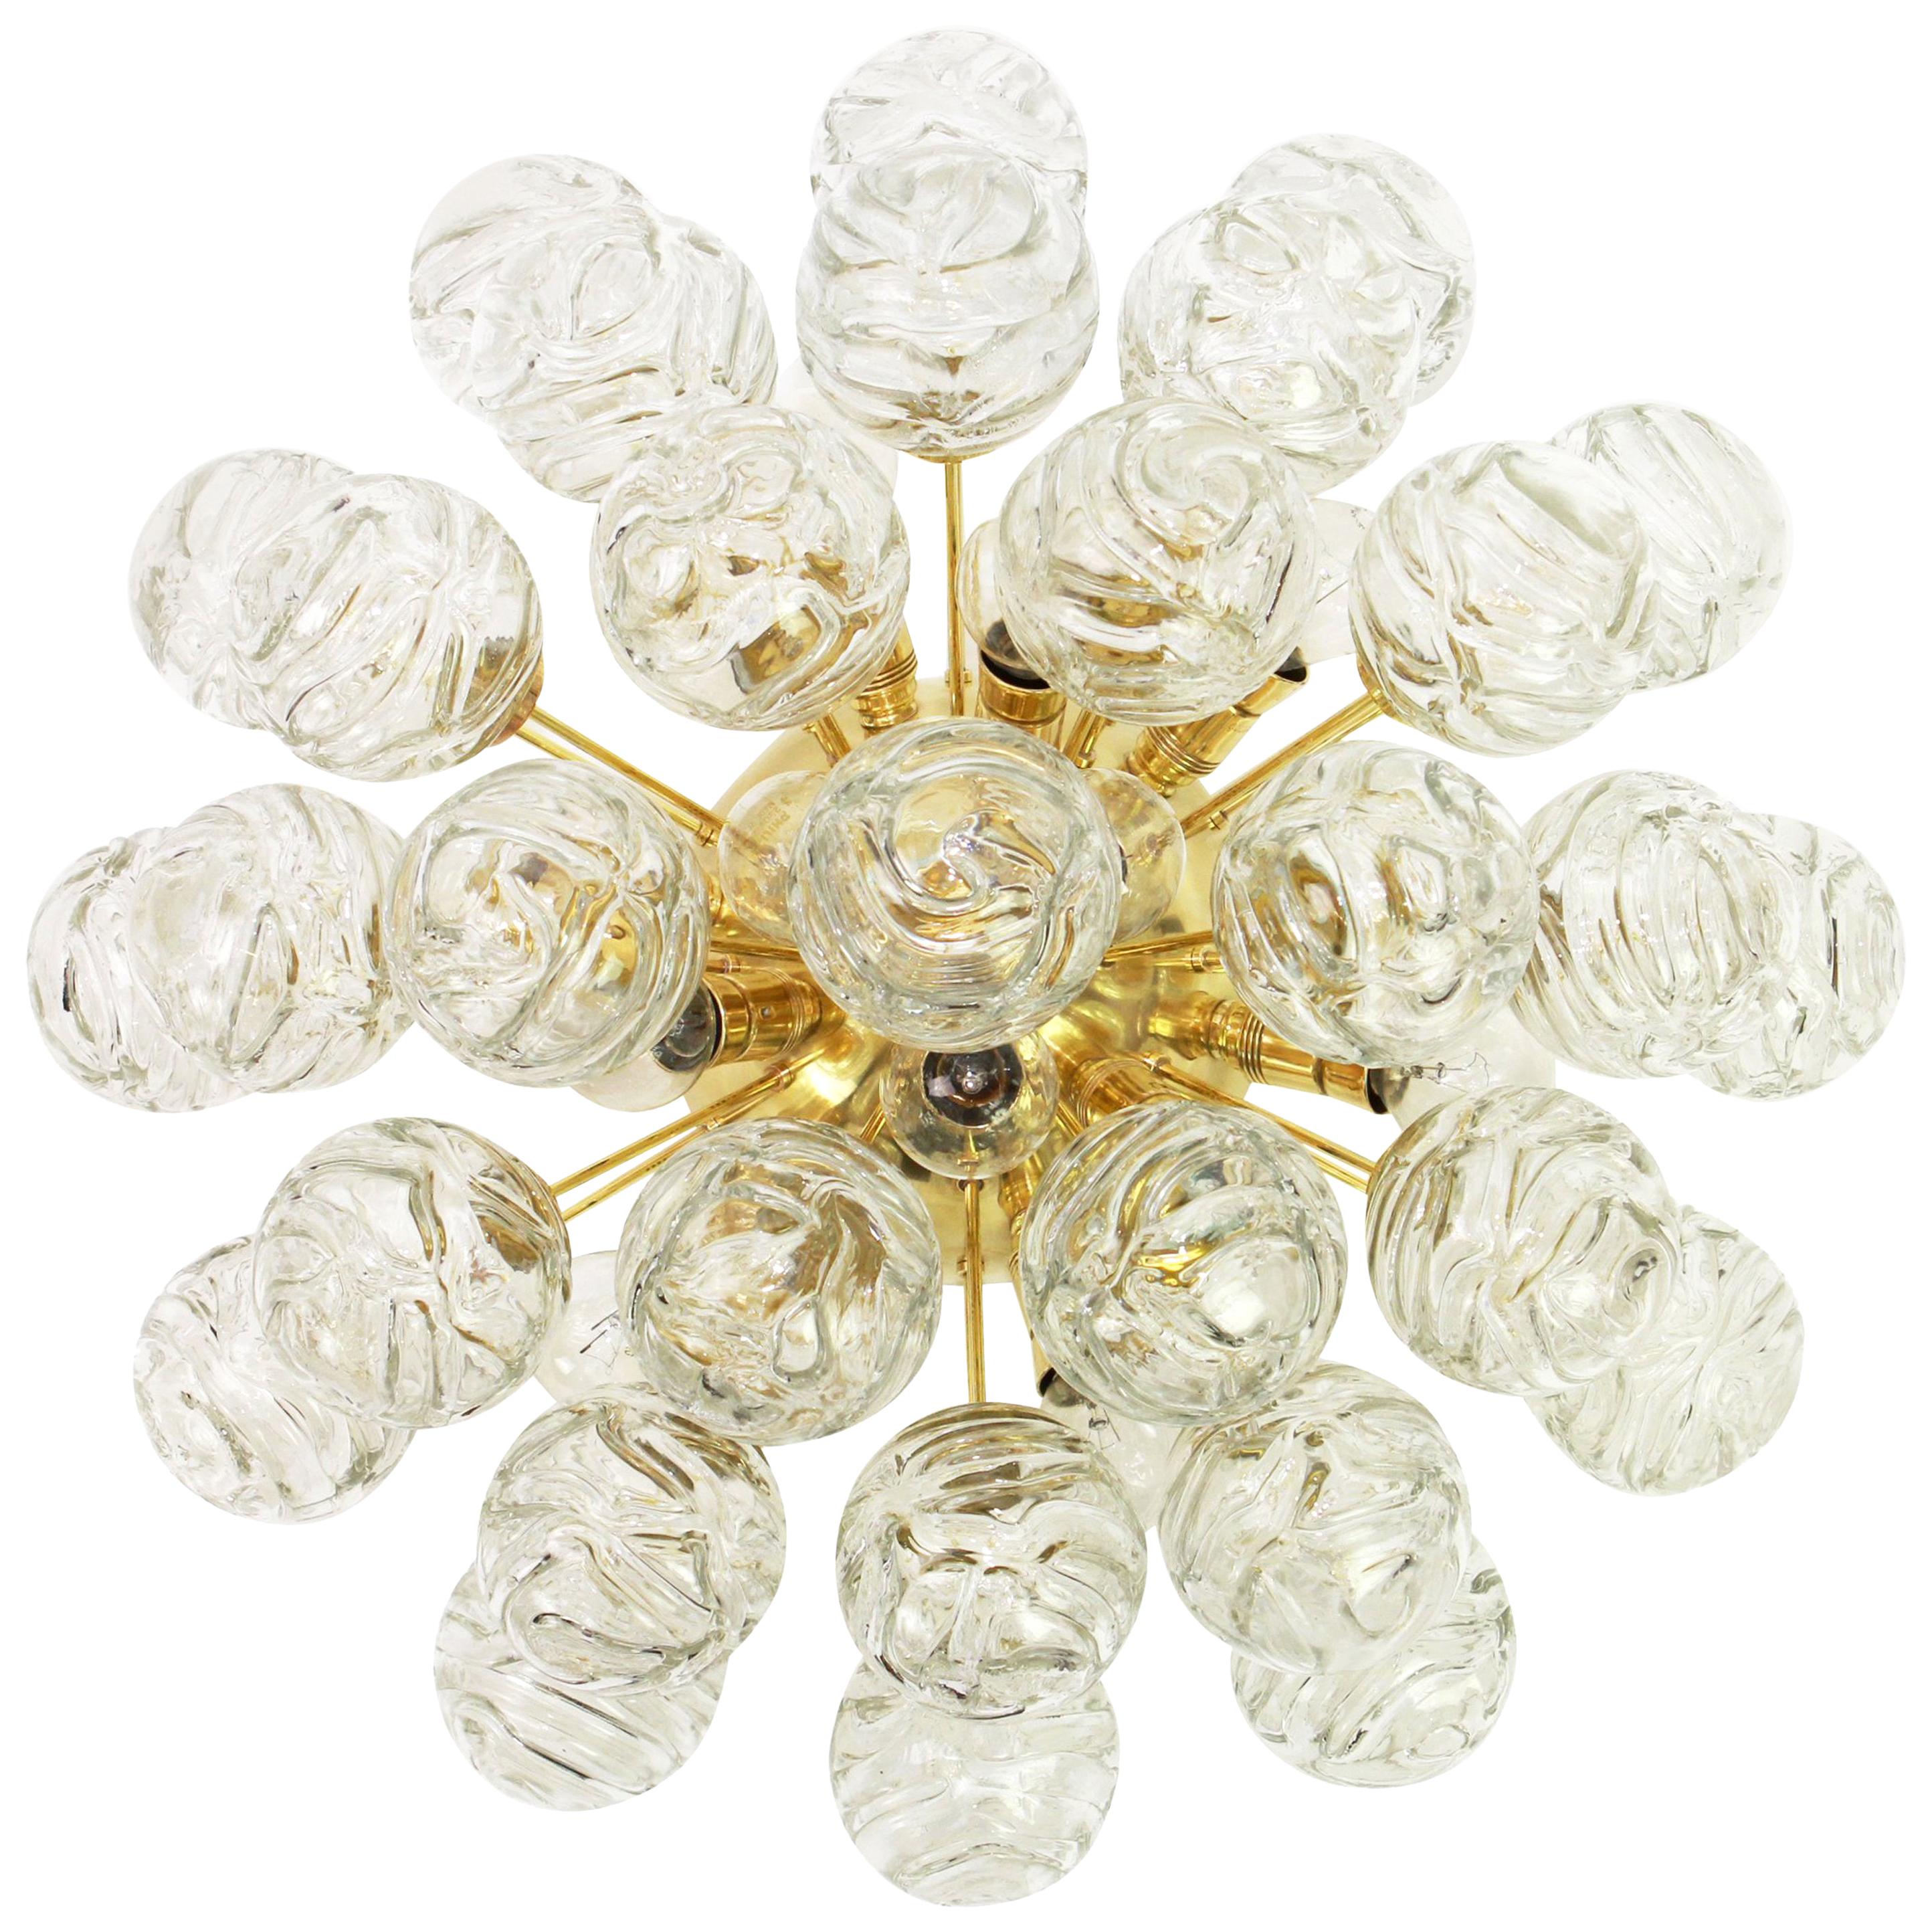 Spectacular Sputnik flushmount with glass snowballs designed by Doria, Germany, 1970s
All glass balls are in good condition.
It needs 12 small size bulbs (E-14 bulbs) up to 40 watts each.
Light bulbs are not included. It is possible to install